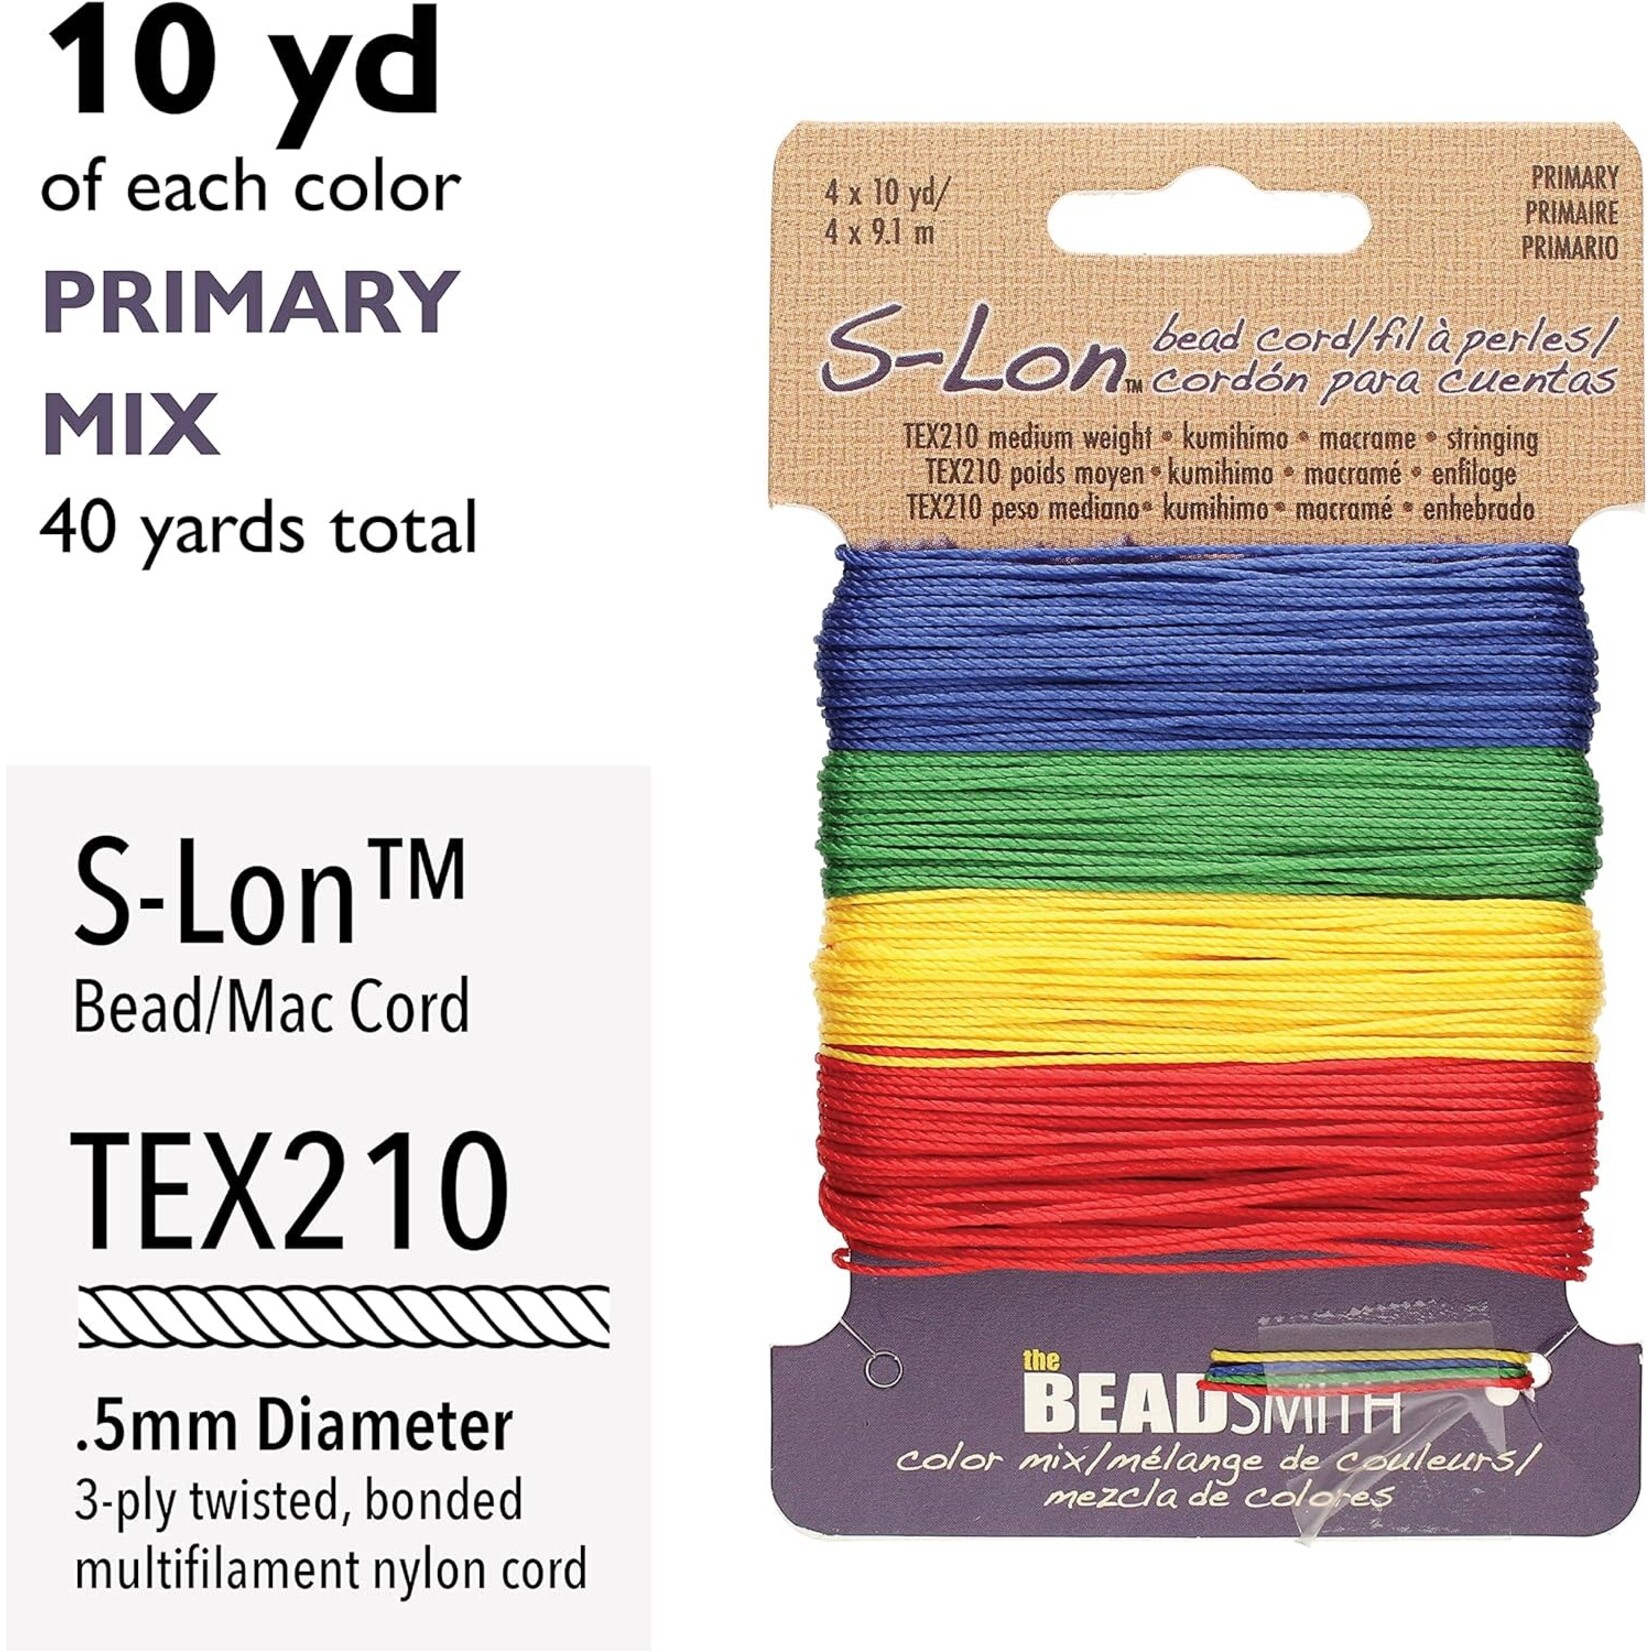 S-Lon TEX210 Primary Colors Mix Card